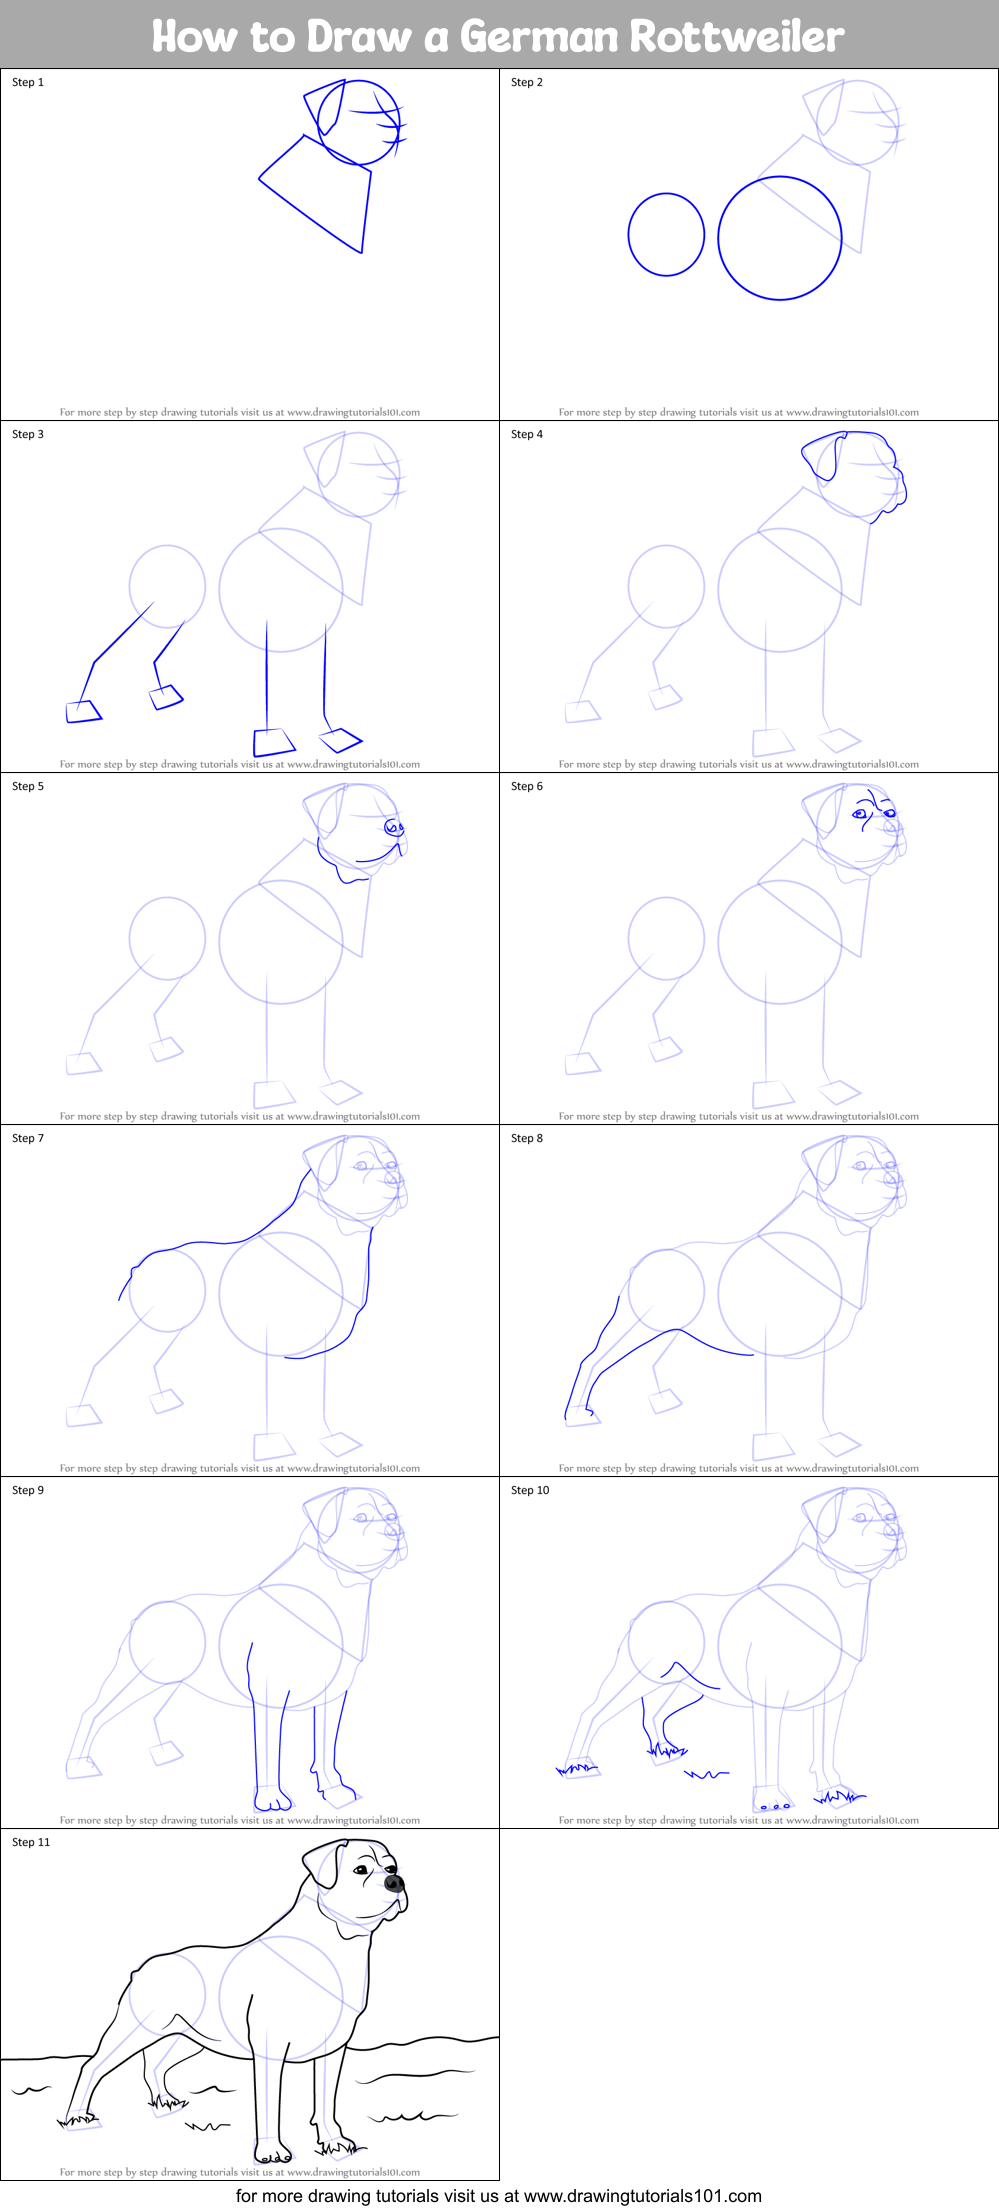 How To Draw A German Rottweiler Printable Step By Step Drawing